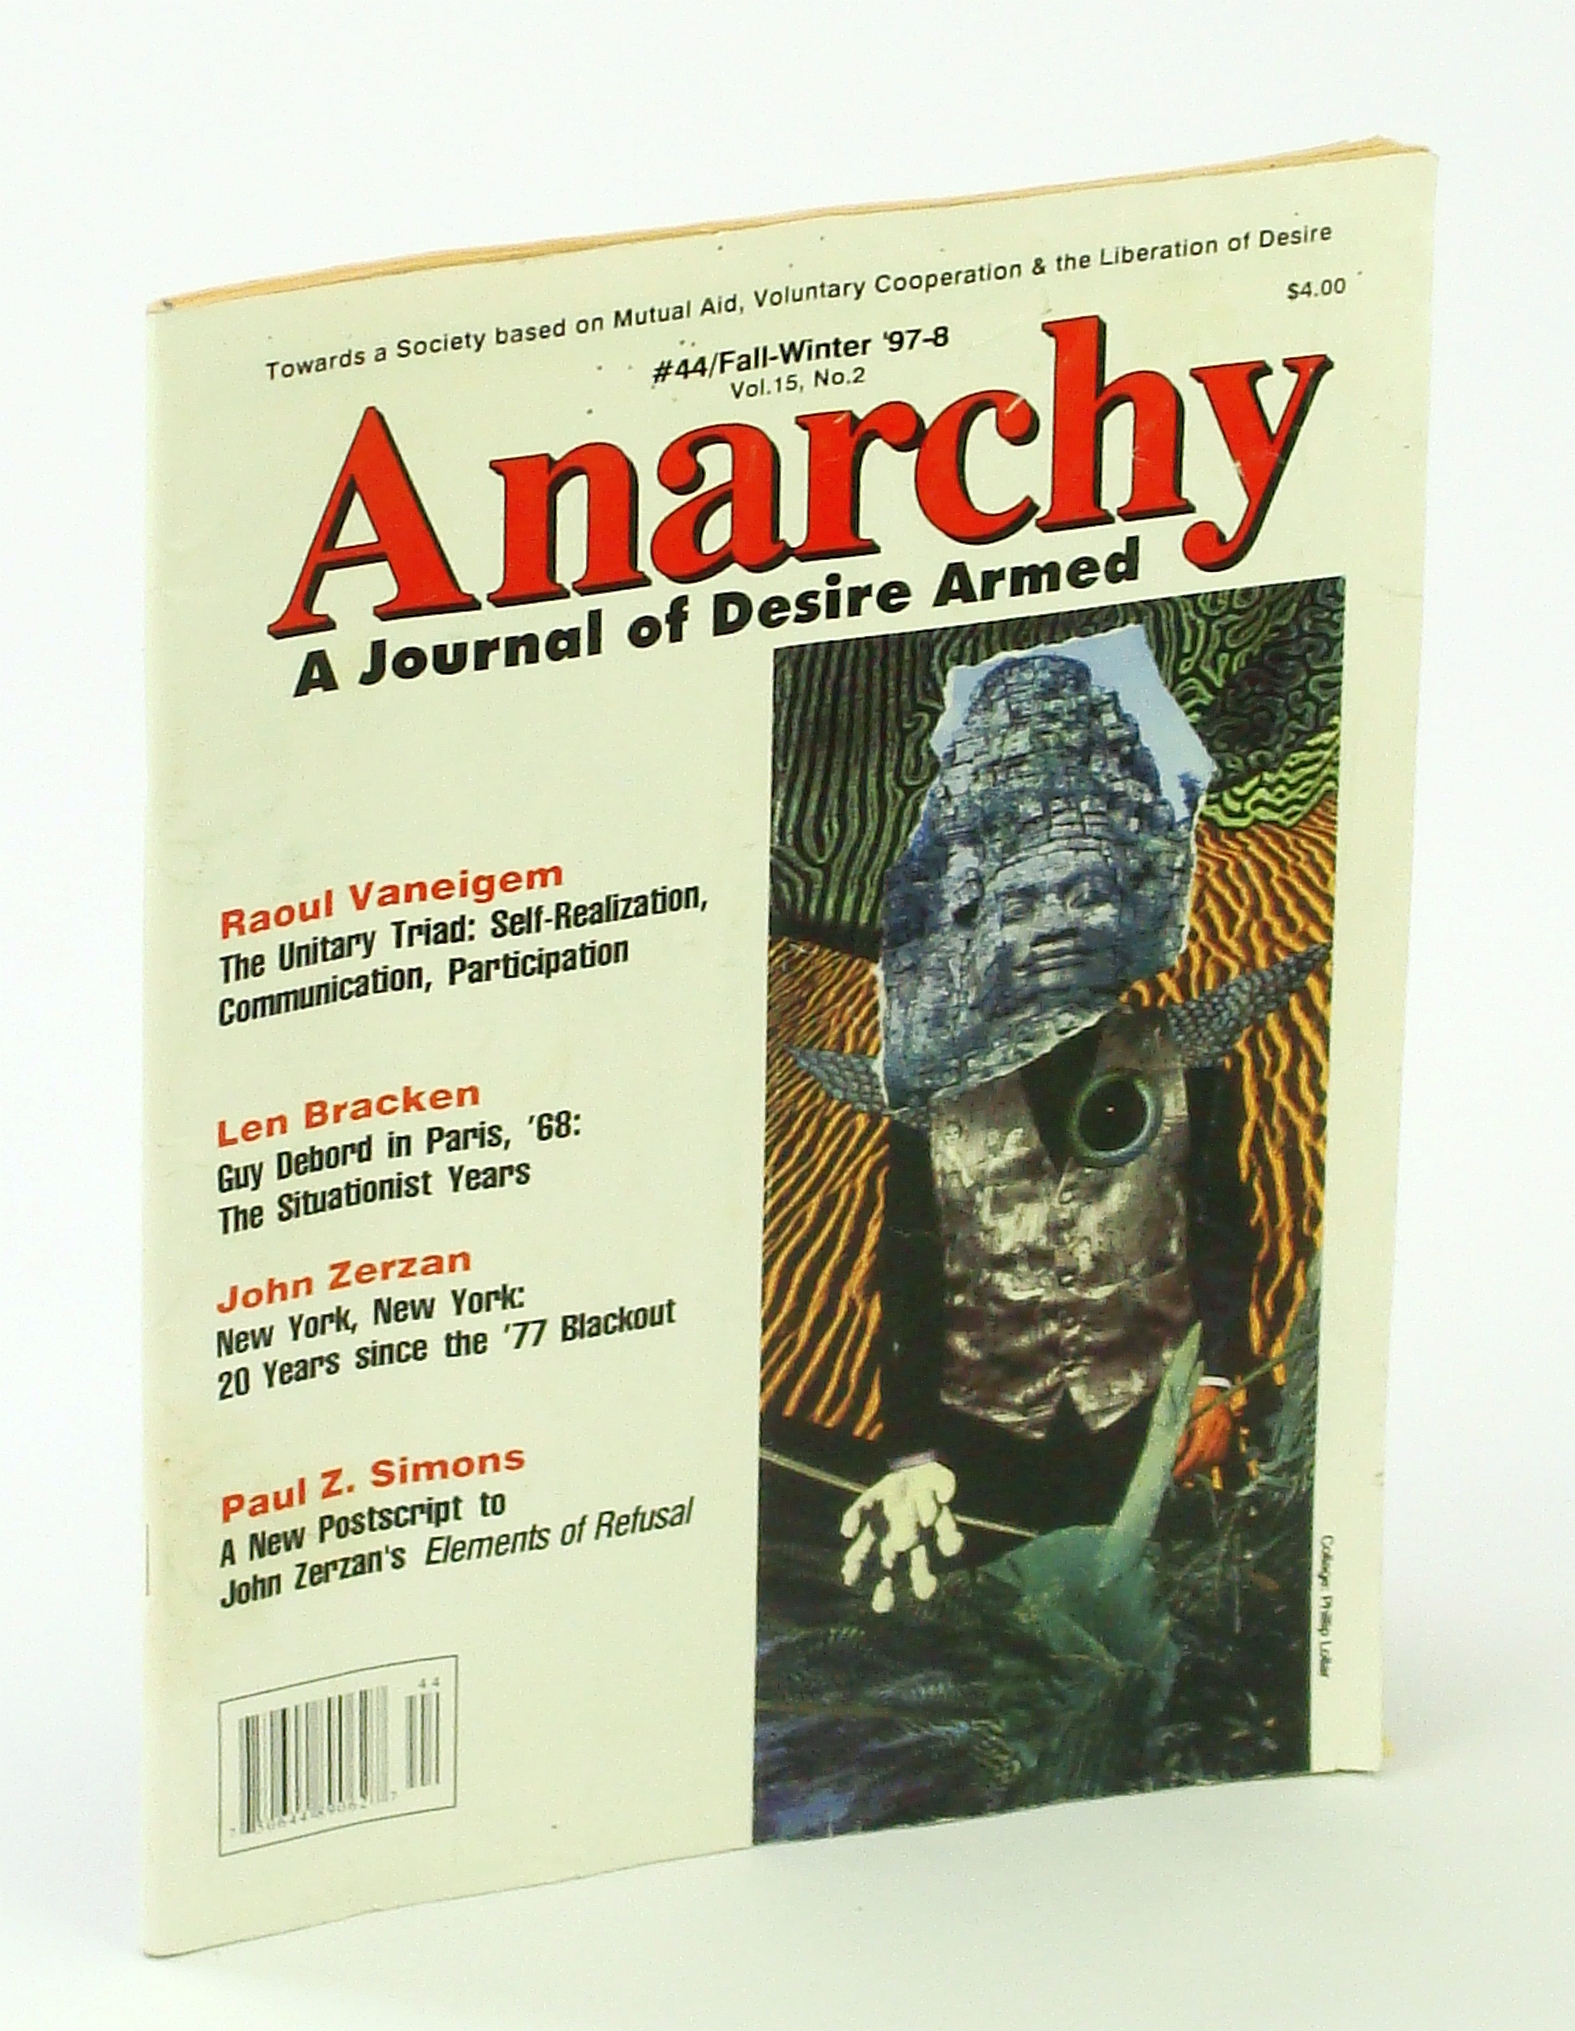 Image for Anarchy [Magazine] A Journal of Desire Armed, #44, Fall - Winter '97-8 [1997 - 1998] Vol 15, No. 2 - Guy Debord in Paris, '68